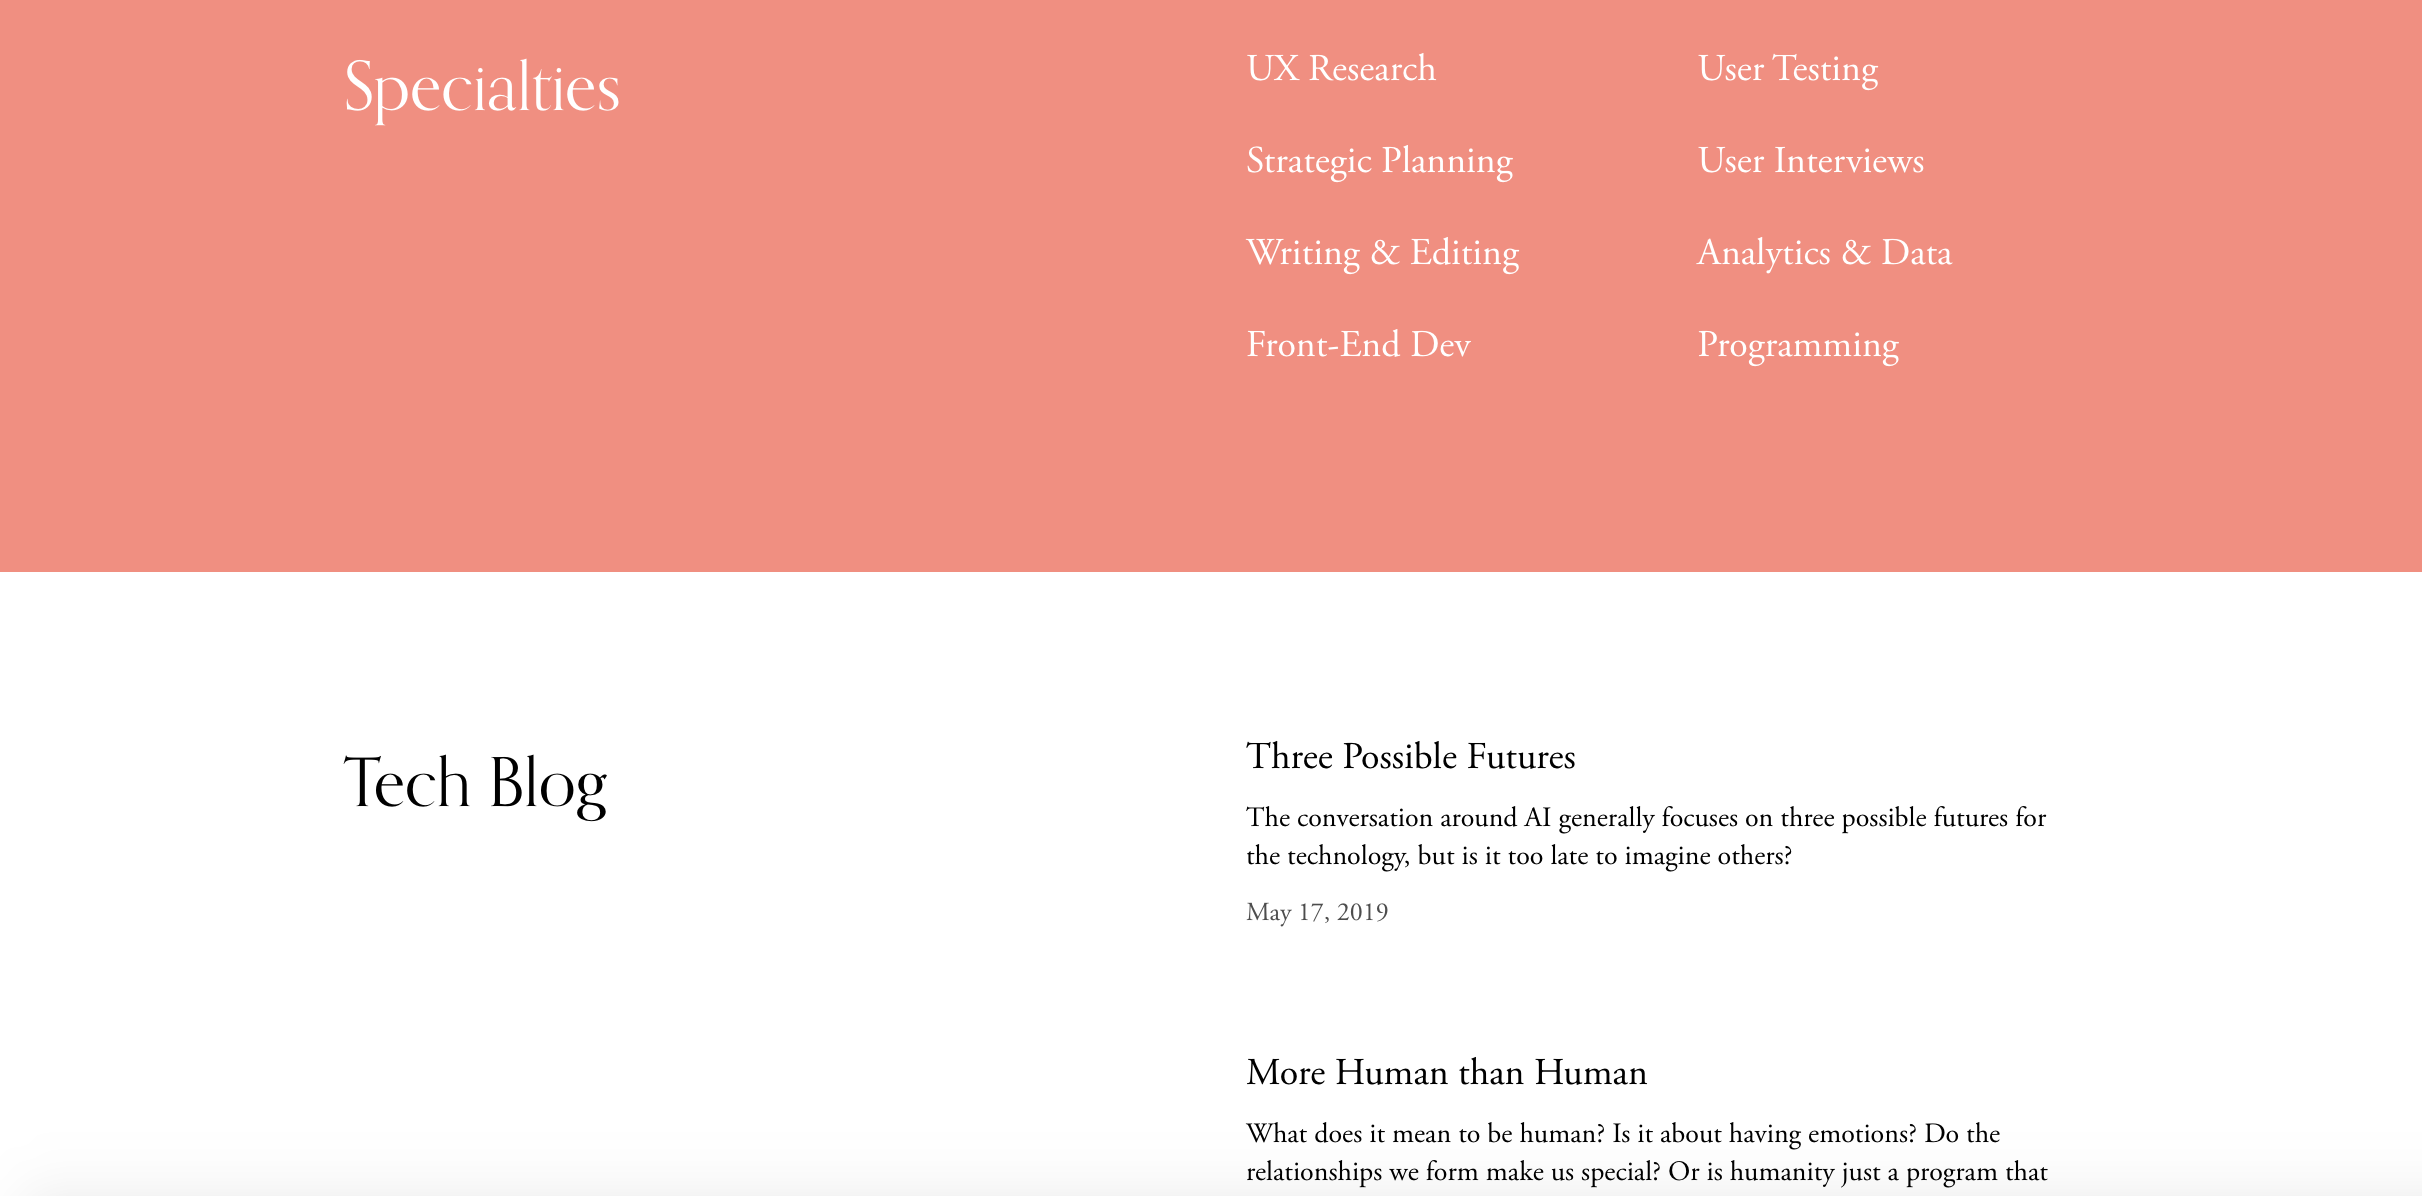 Amal_demo_site_uses_page_sections_to_make_a_striking_resume_in_distinct_parts.png